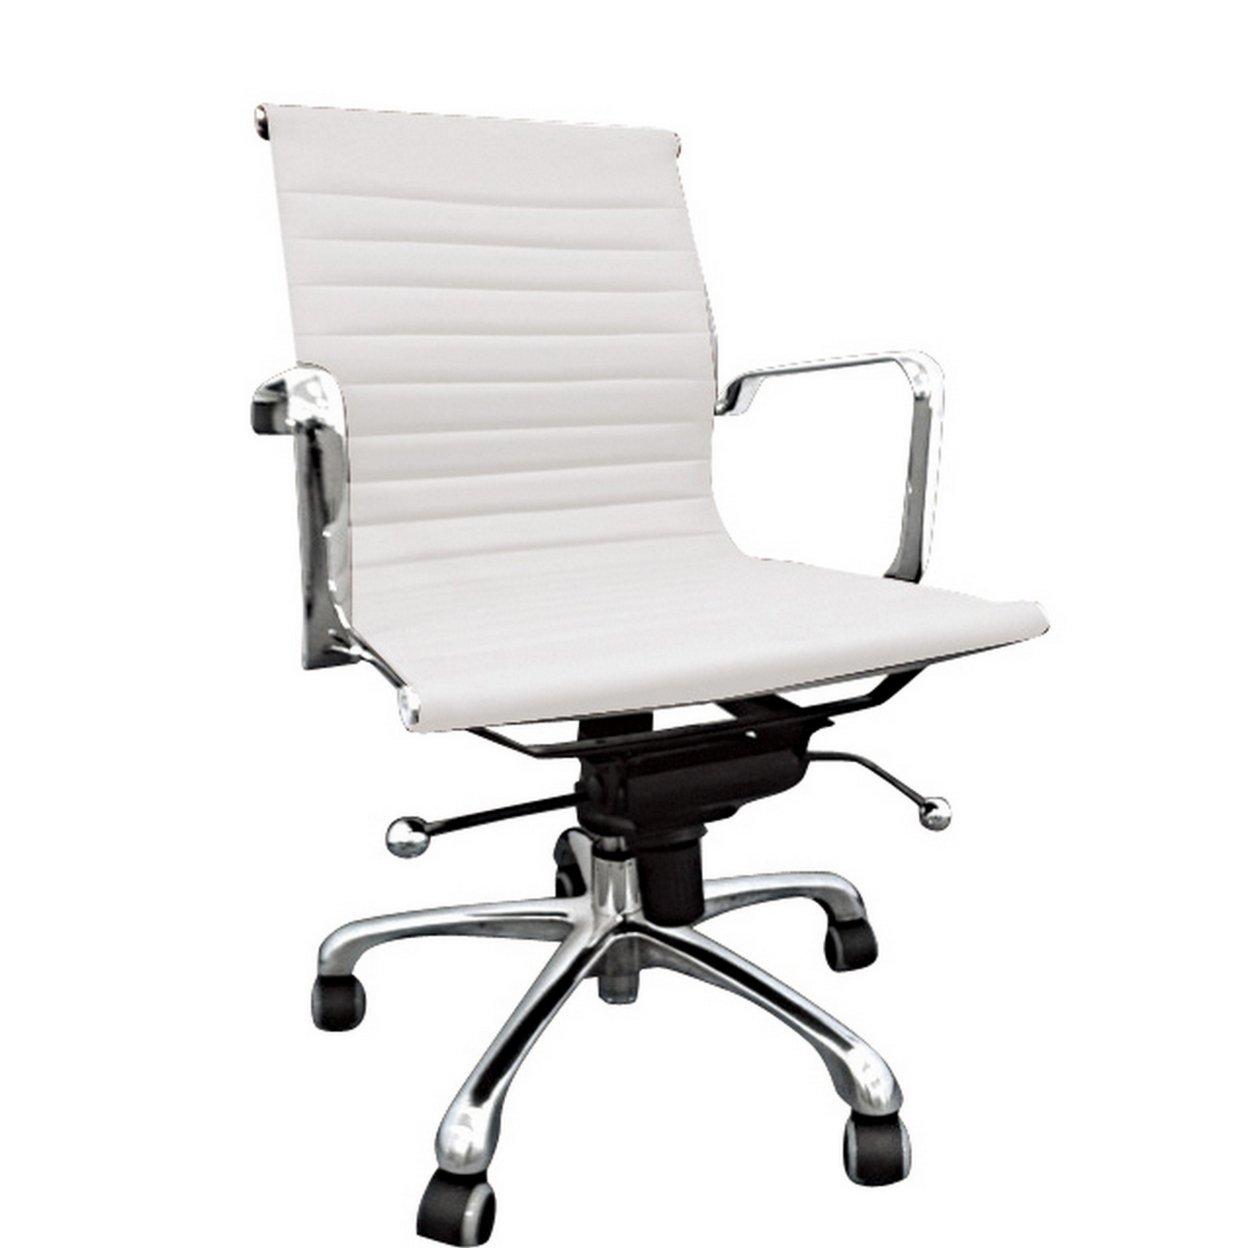 Elle 20 Inch Back Swivel Office Chair With Wheels, Tufted White And Chrome- Saltoro Sherpi